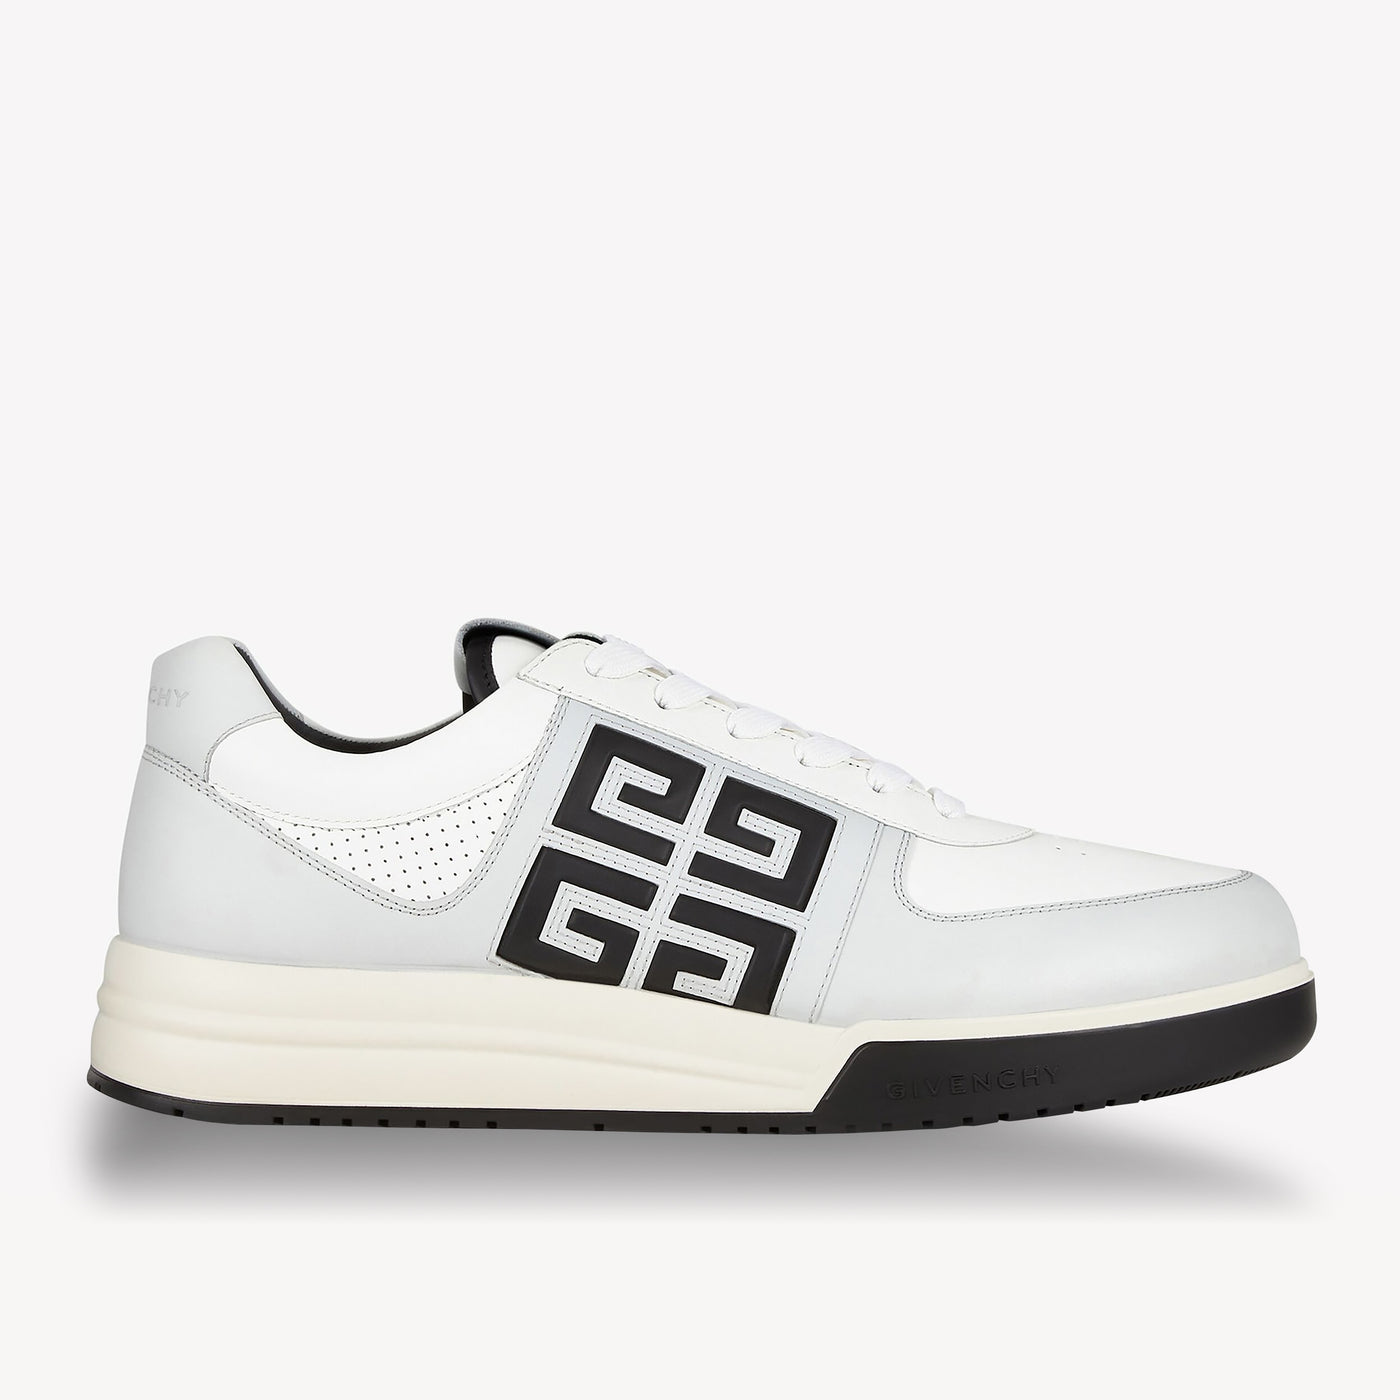 Givenchy G4 Low Top Sneakers